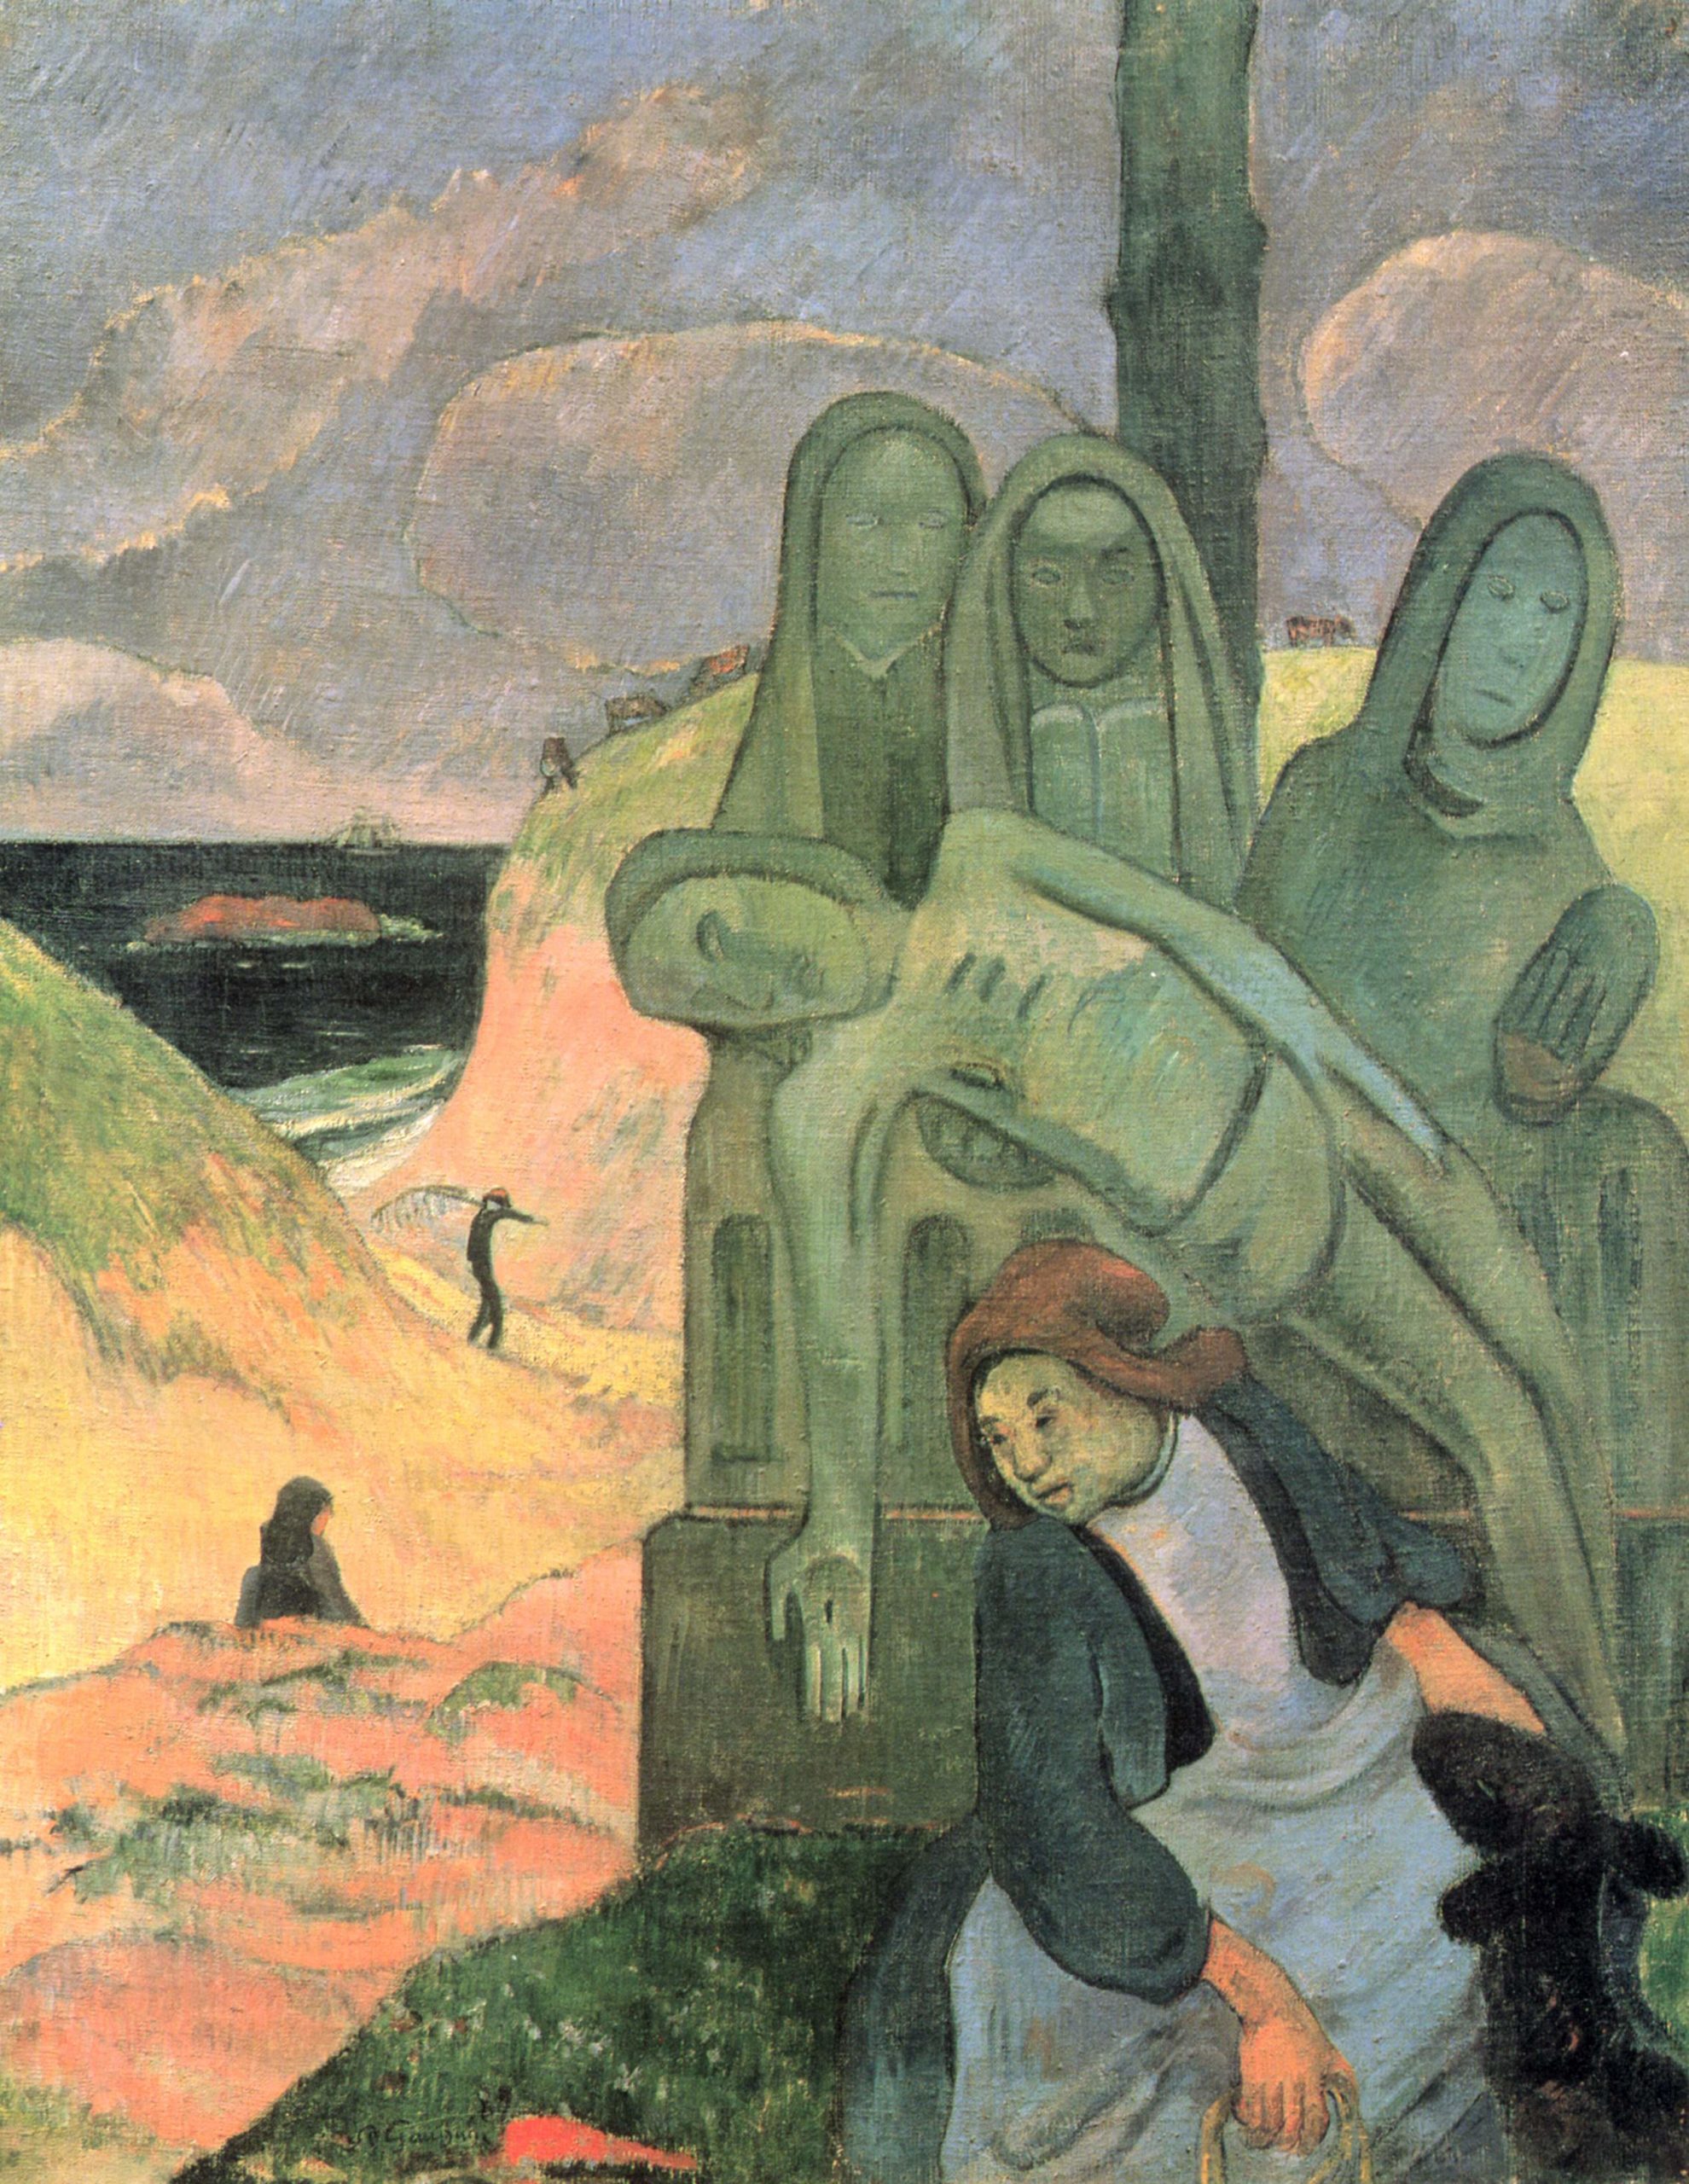 Paul Gauguin, The Green Christ or Breton Calvary, 1889, oil on canvas, 92 x 73 cm (Royal Museums of Fine Arts of Belgium)